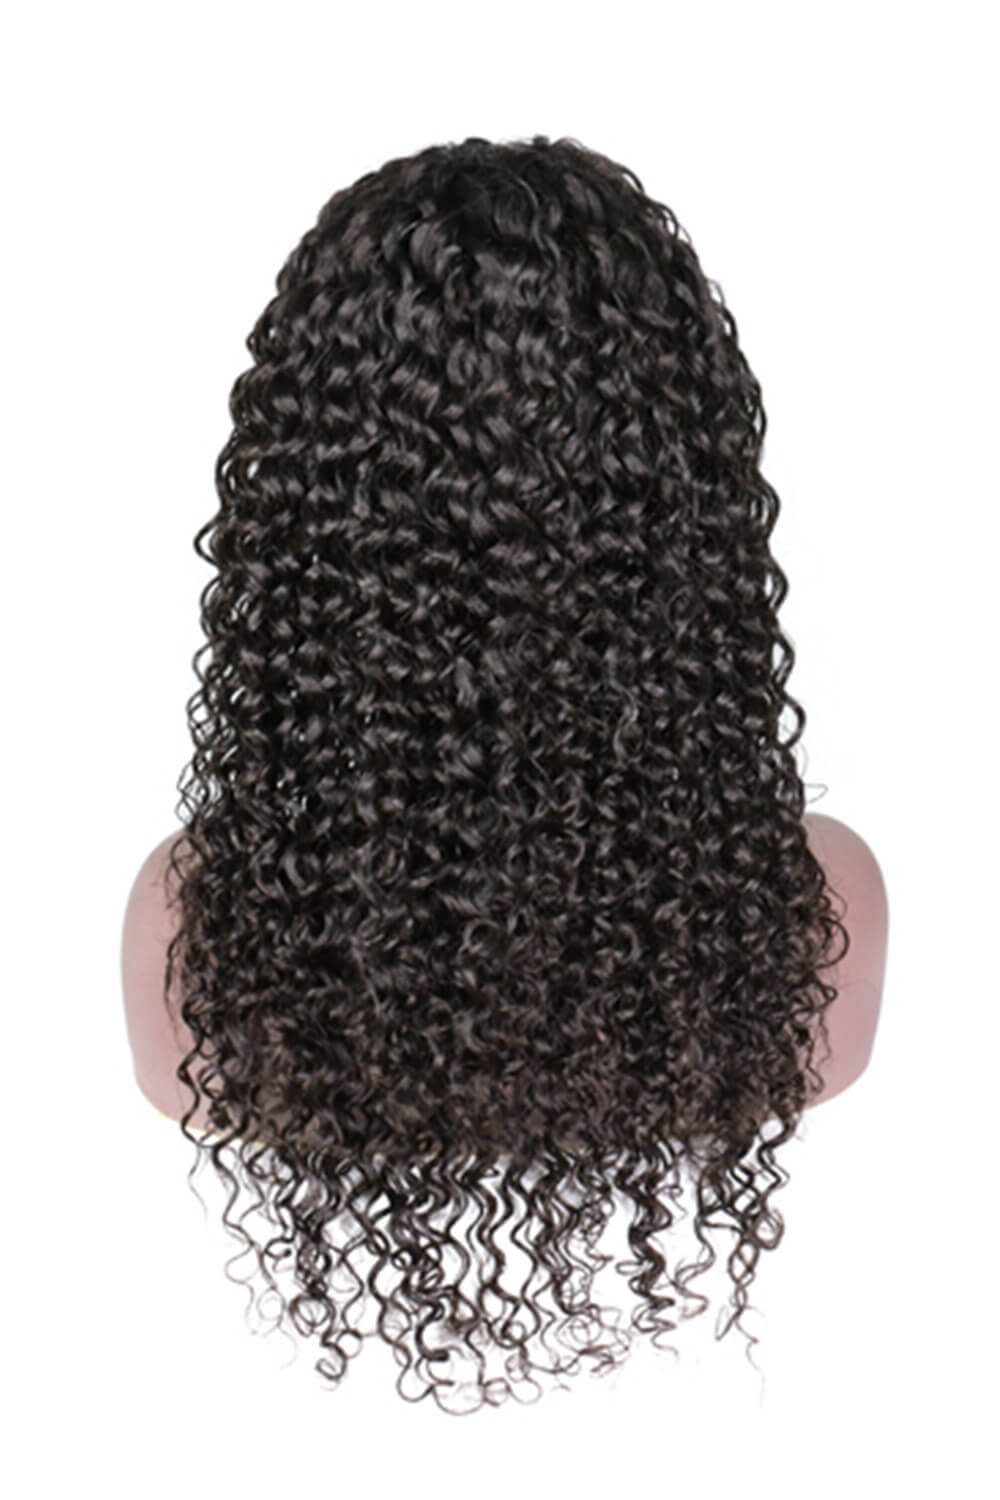 5x5-lace-closure-wig-for-women-glueless-curly-virgin-human-hair-6